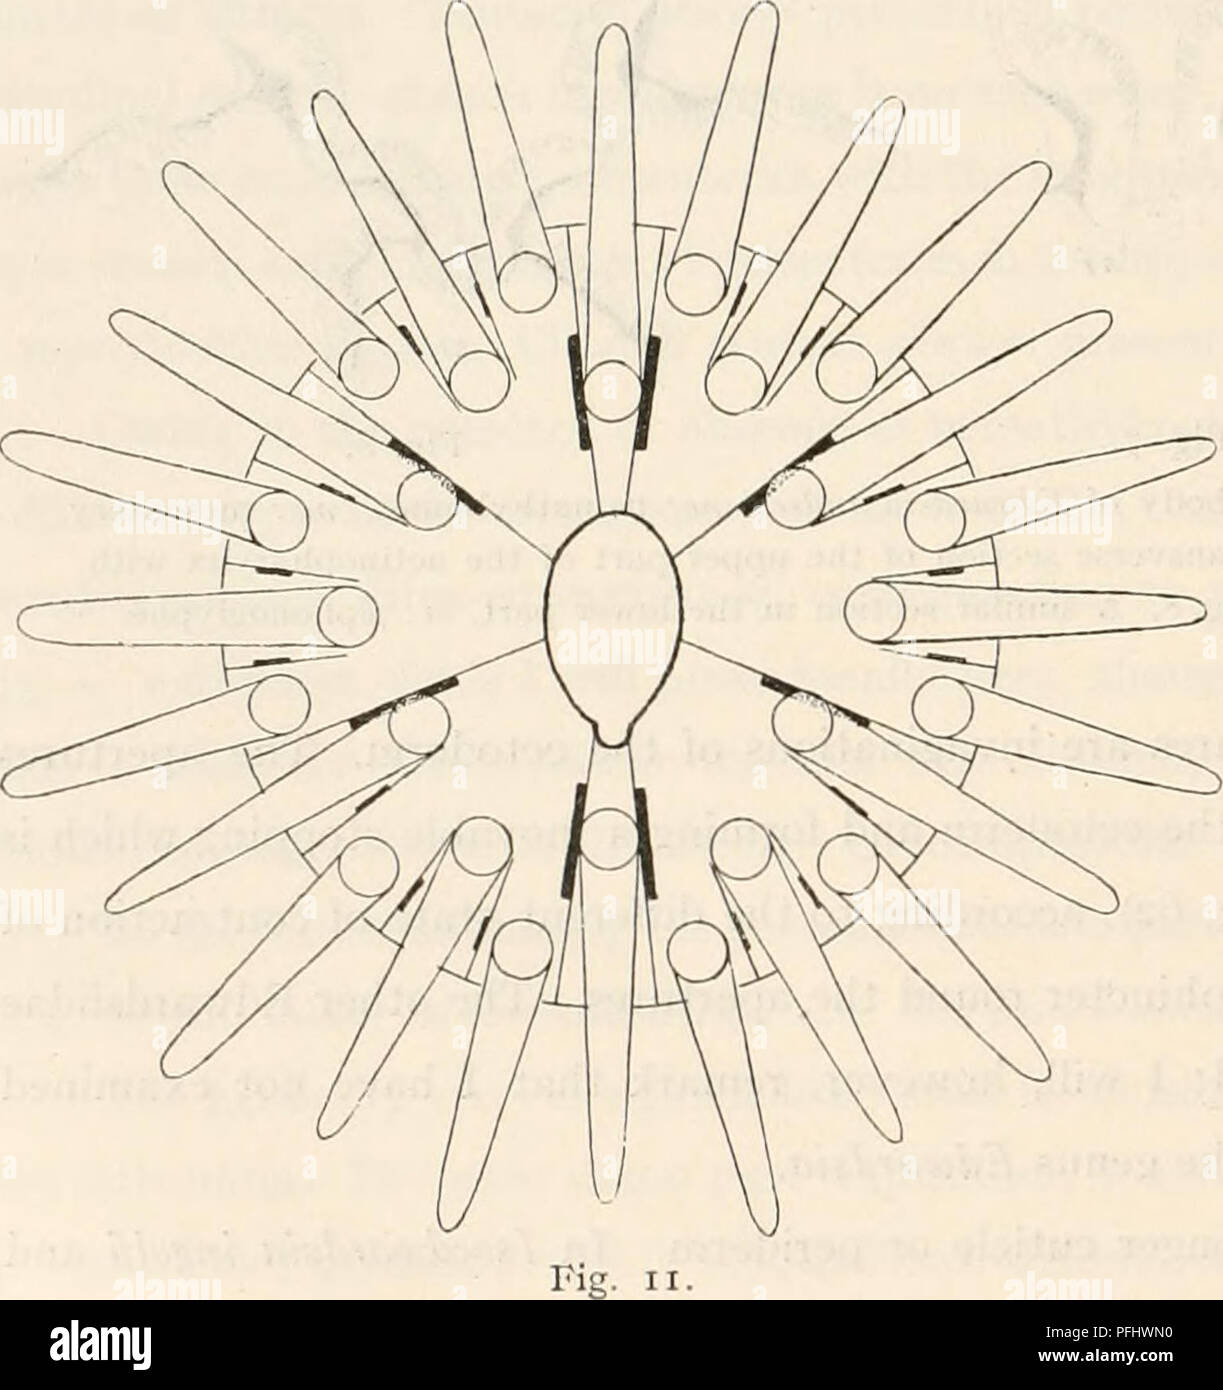 . The Danish Ingolf-Expedition. Scientific expeditions; Arctic Ocean. Fig. 9. Fig. 10. Textfigs. 9—II. Arrangement of tentacles and mesenteries in Edivardsia andresi (fig. 9), E. claparedii (fig. 10) and Milne- edwardsia loveni and carnea (fig. 11). In order to show the arrangement in pairs, the imperfect mesenteries are drawn as having pennons. In fact that is not the case. in Milne-edwardsia polaris. These clusters form weak batteries of nematocysts. In the g^rnxsEdwardsiaand Isoedwardsia the nematocysts of the scapus are more concentrated and enclosed in so-called nemathybo- mes, forming st Stock Photo